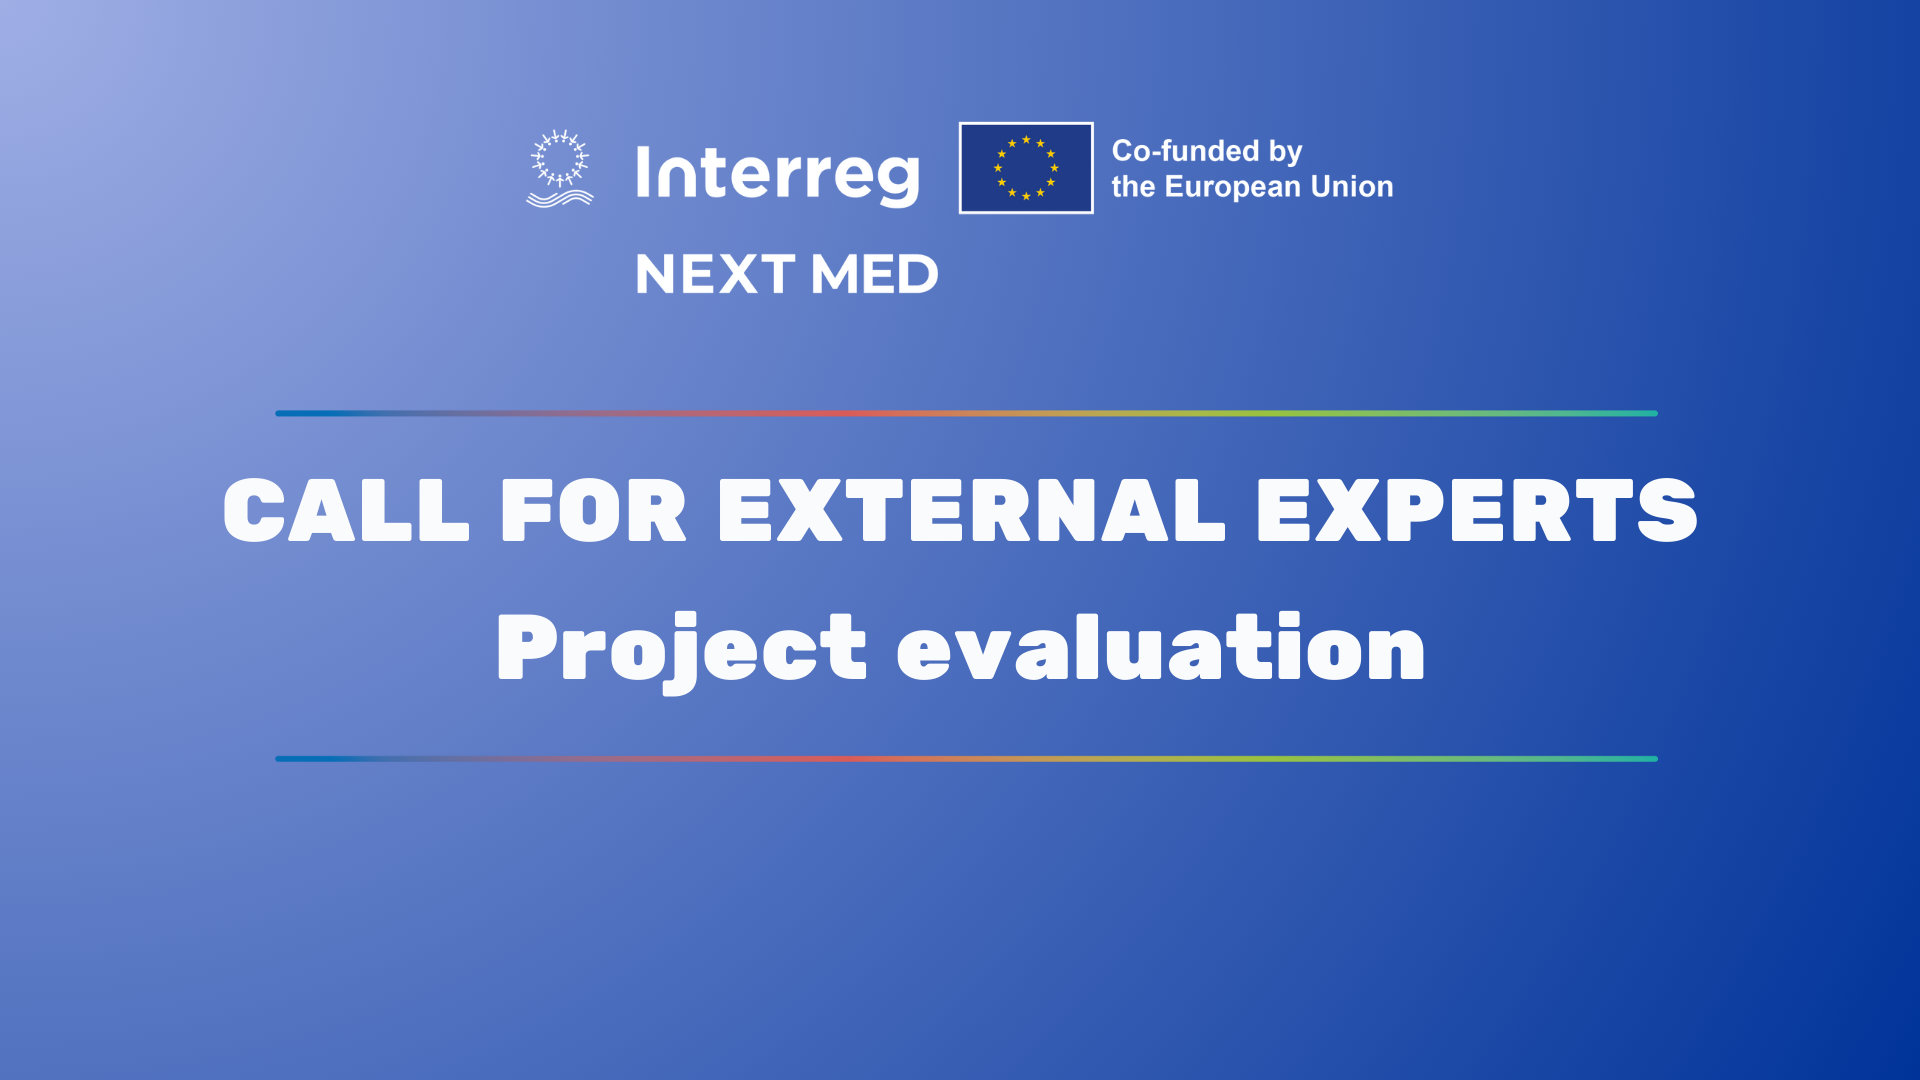 Interreg NEXT MED Programme is looking for external experts to support the evaluation of project proposals